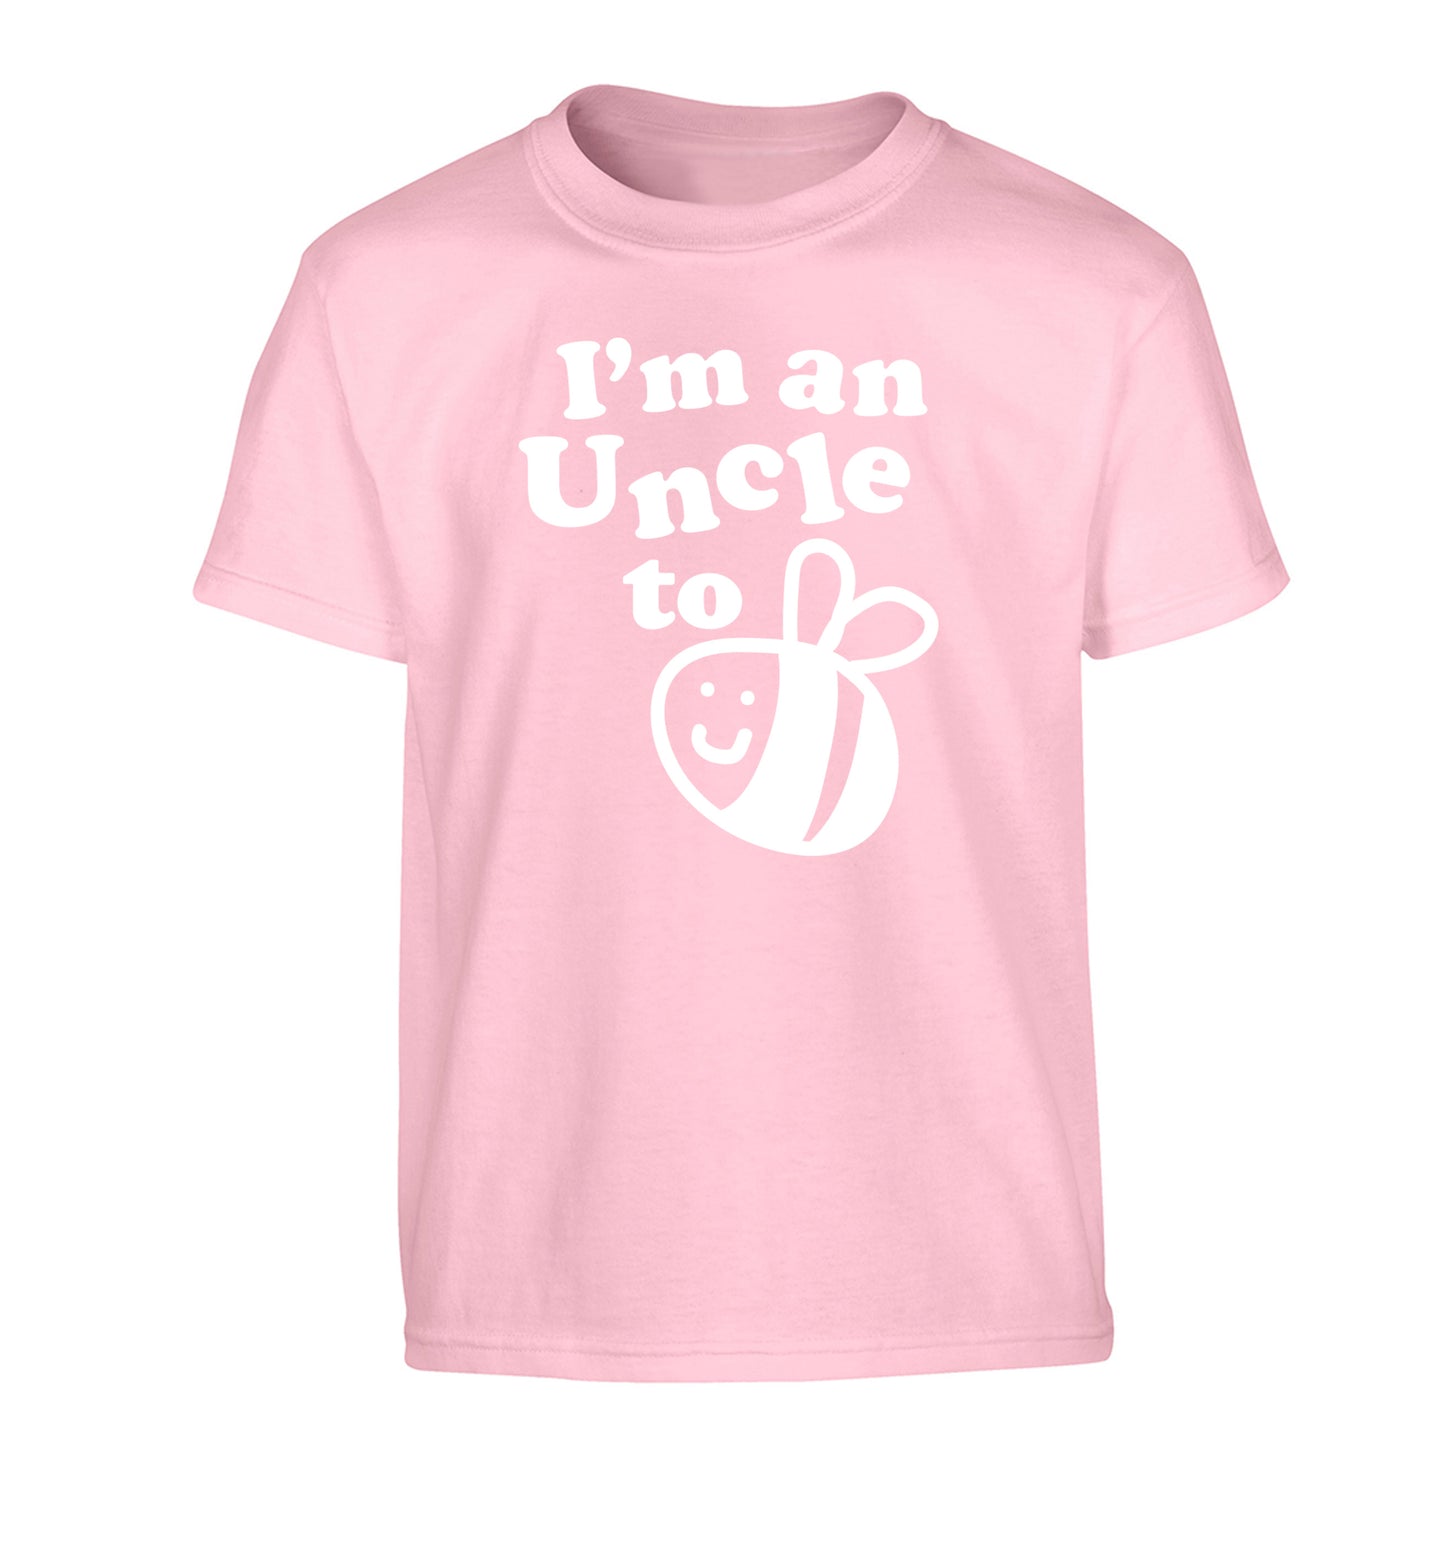 I'm an uncle to be Children's light pink Tshirt 12-14 Years